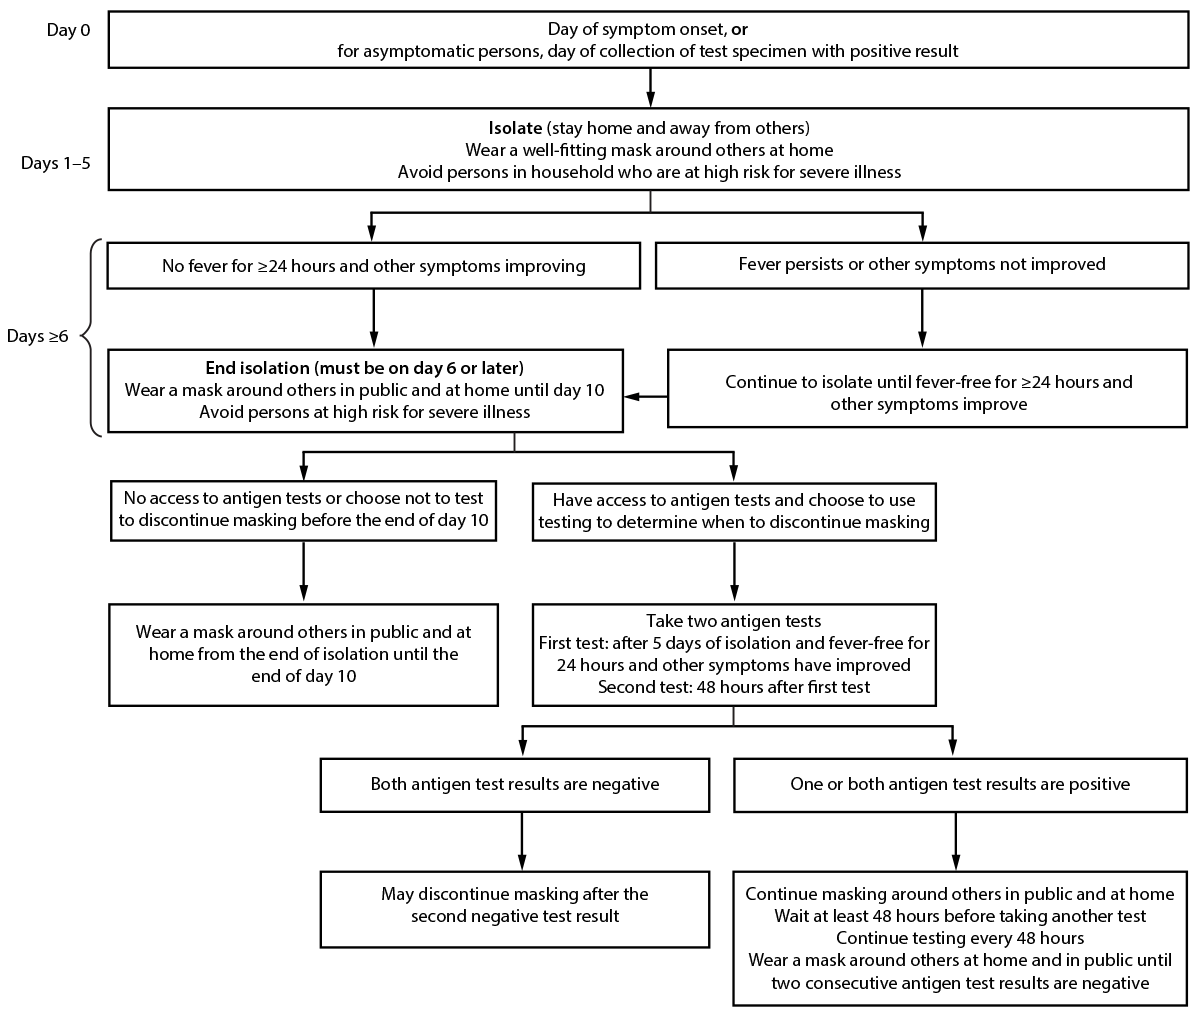 Figure is a flowchart showing recommendations for isolation, masking, and additional precautions for persons with COVID-19 illness or who receive a positive SARS-CoV-2 test result, in the United States, during August 2022.